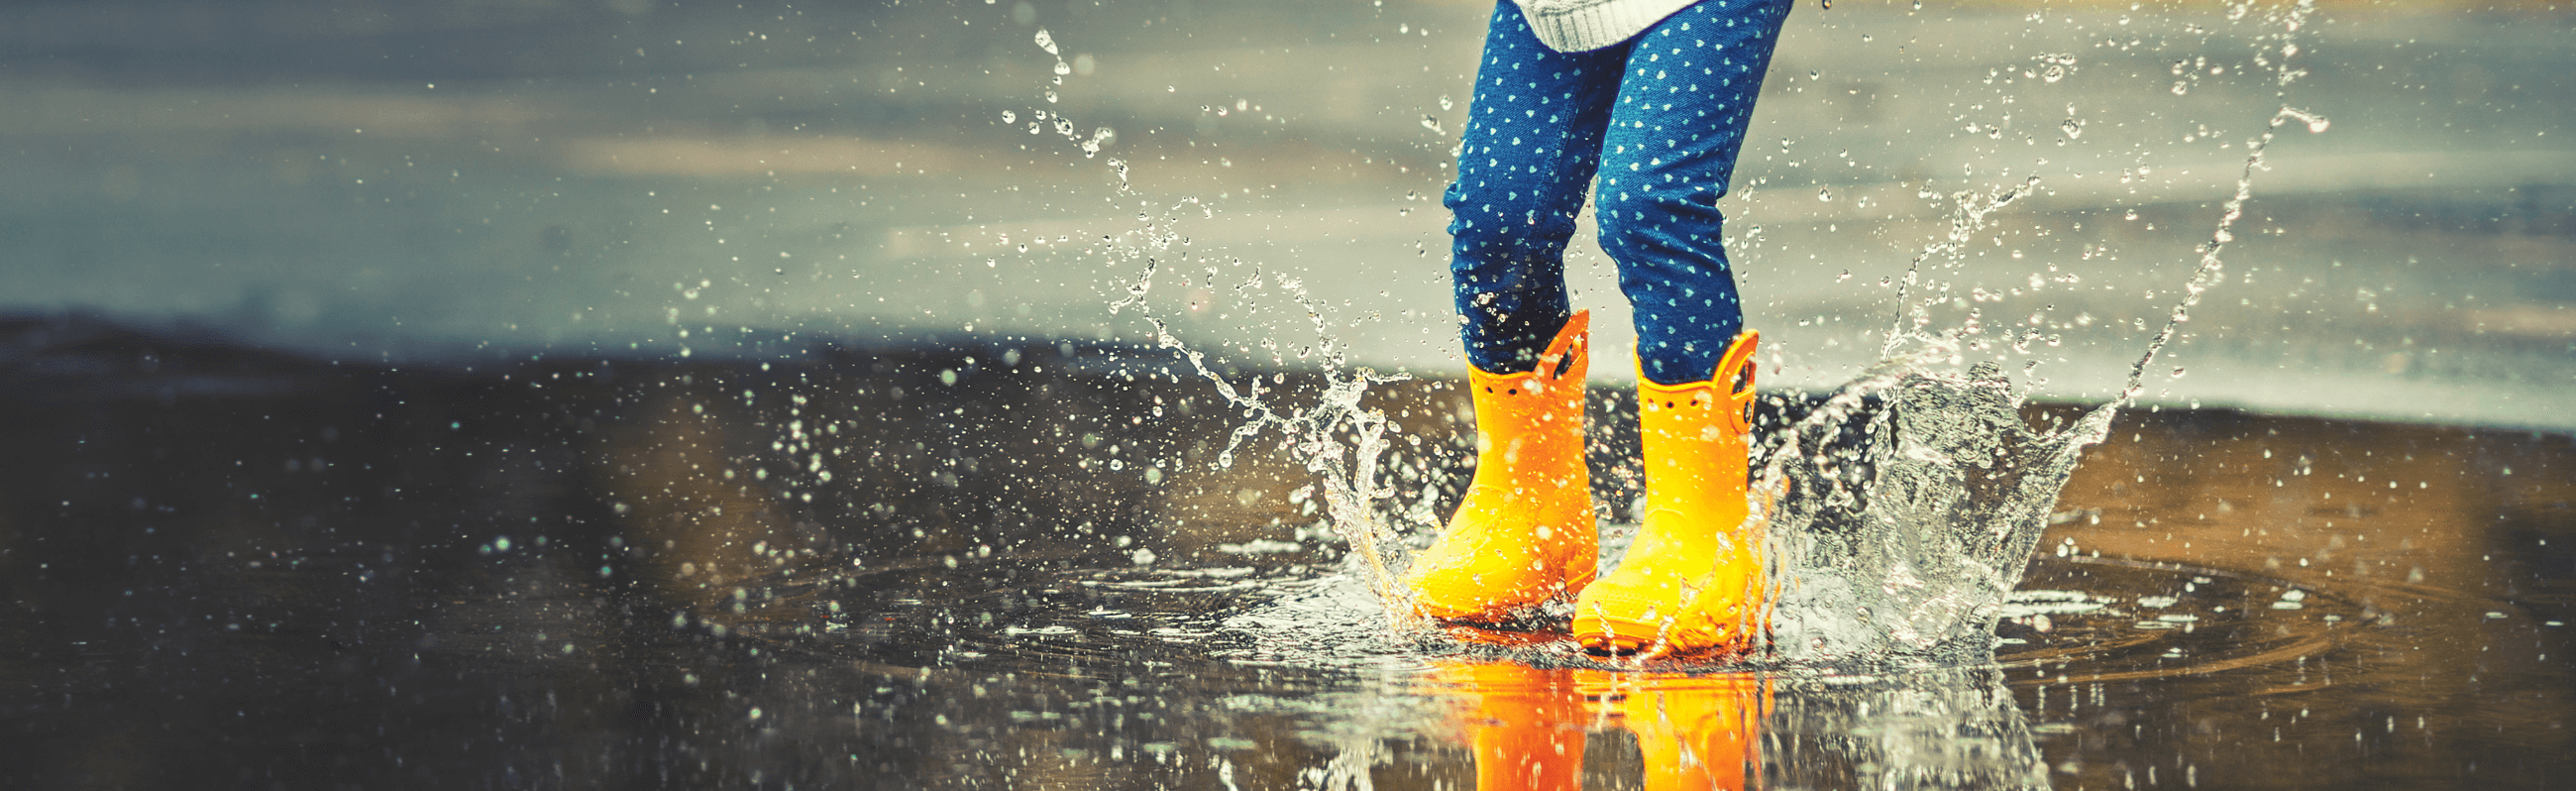 Photograph of a child splashing in a puddle